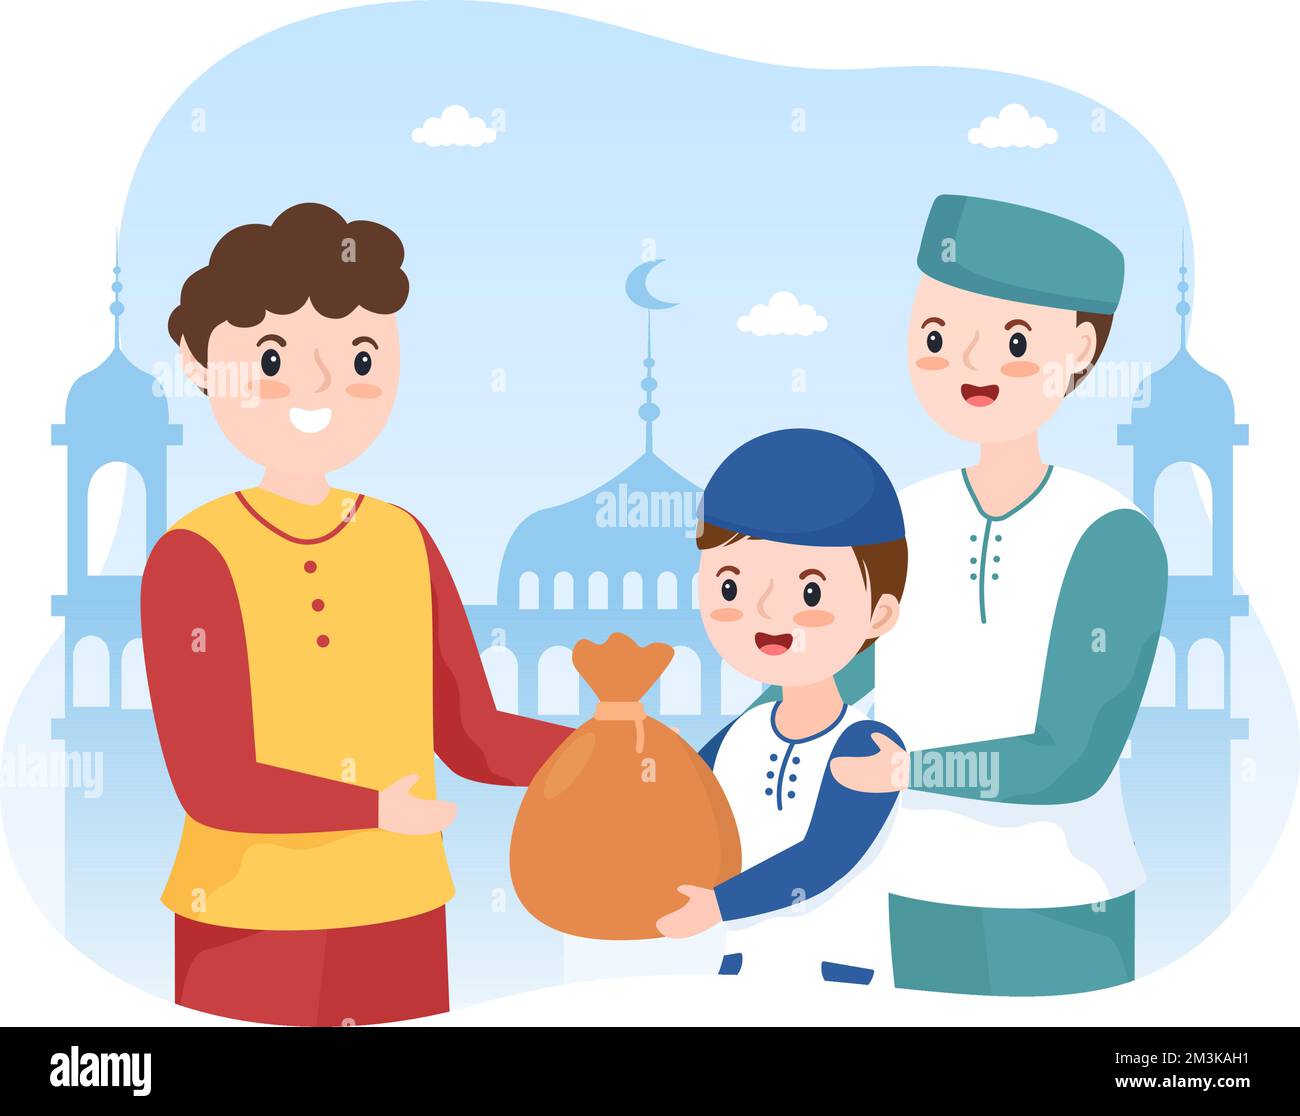 Muslim Kids Giving Alms, Zakat or Infaq Donation to a Person Who Need it in Flat Cartoon Poster Hand Drawn Templates Illustration Stock Vector